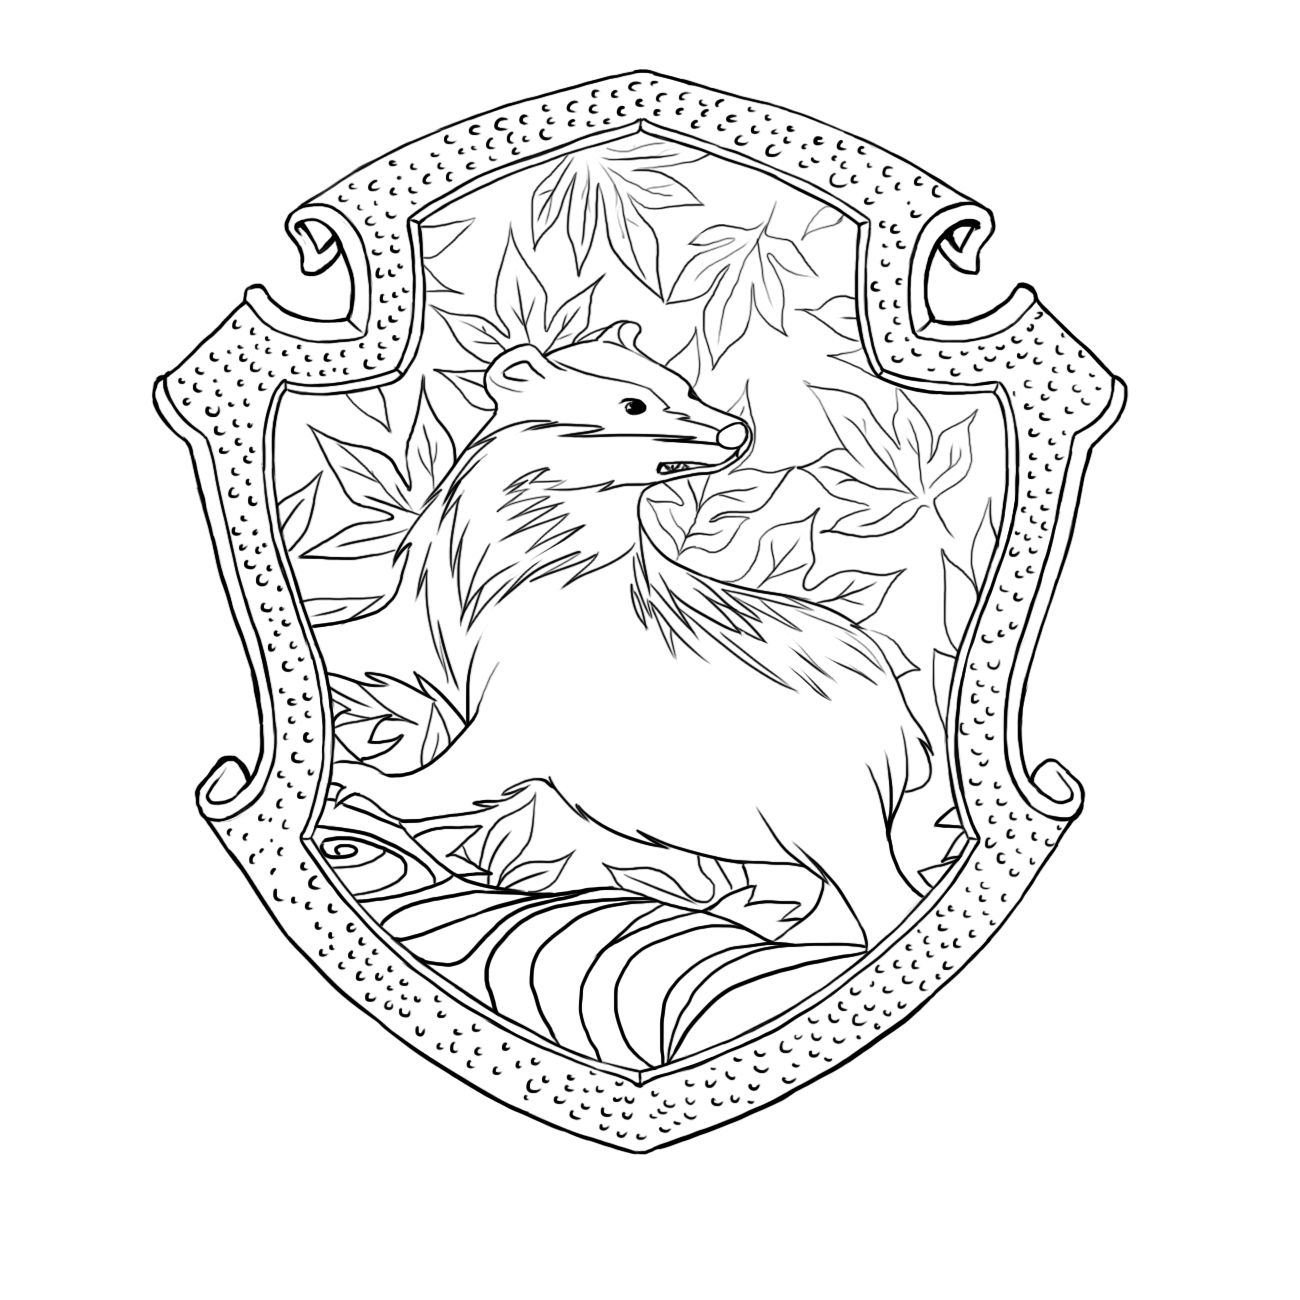 Download or print this amazing coloring page: Hufflepuff Crest Coloring Pag...